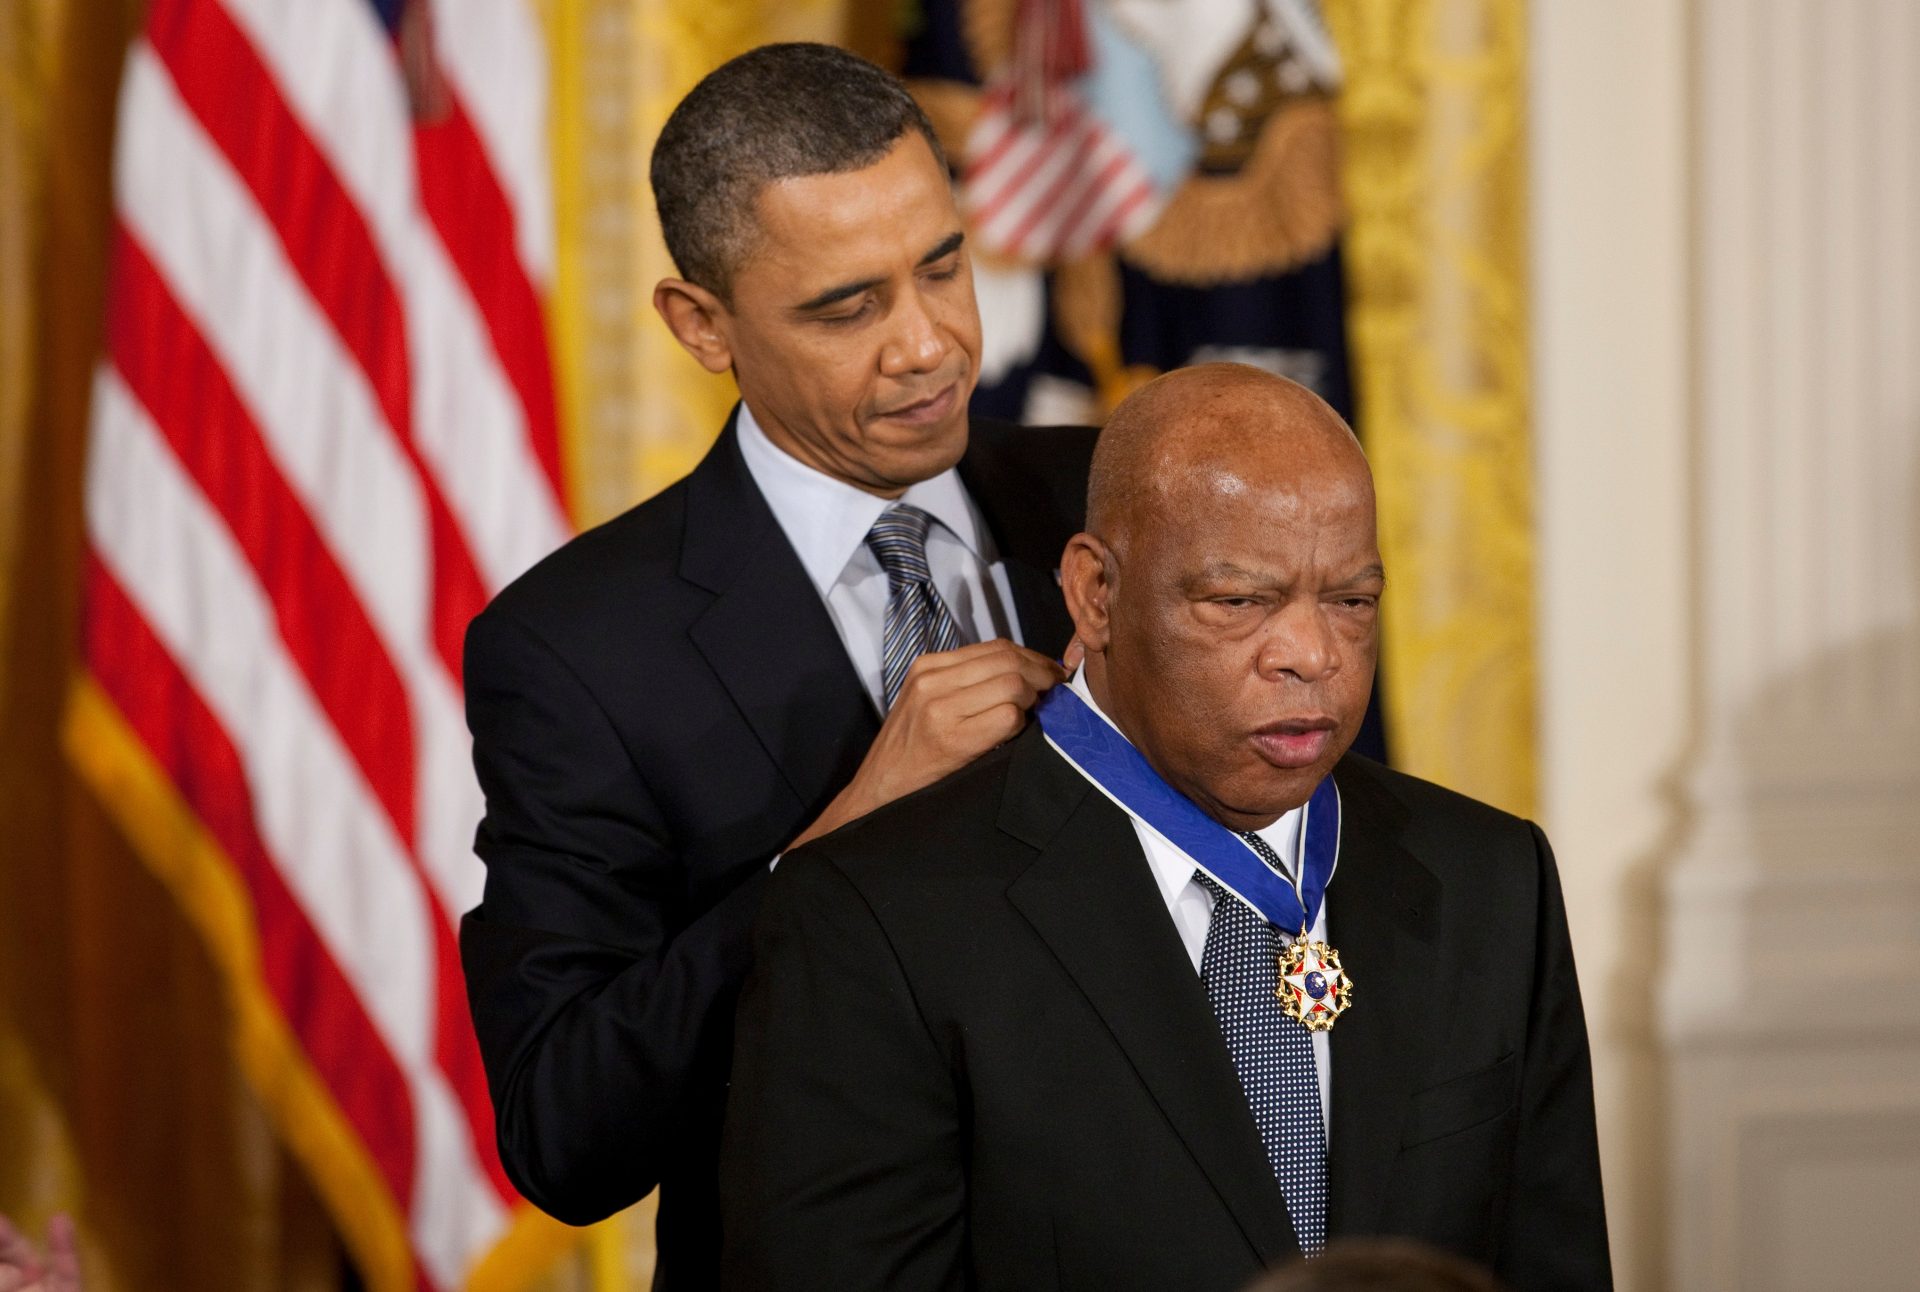 Barack Obama and Extra Public Figures Pay Tribute to Civil Rights Leader John Lewis